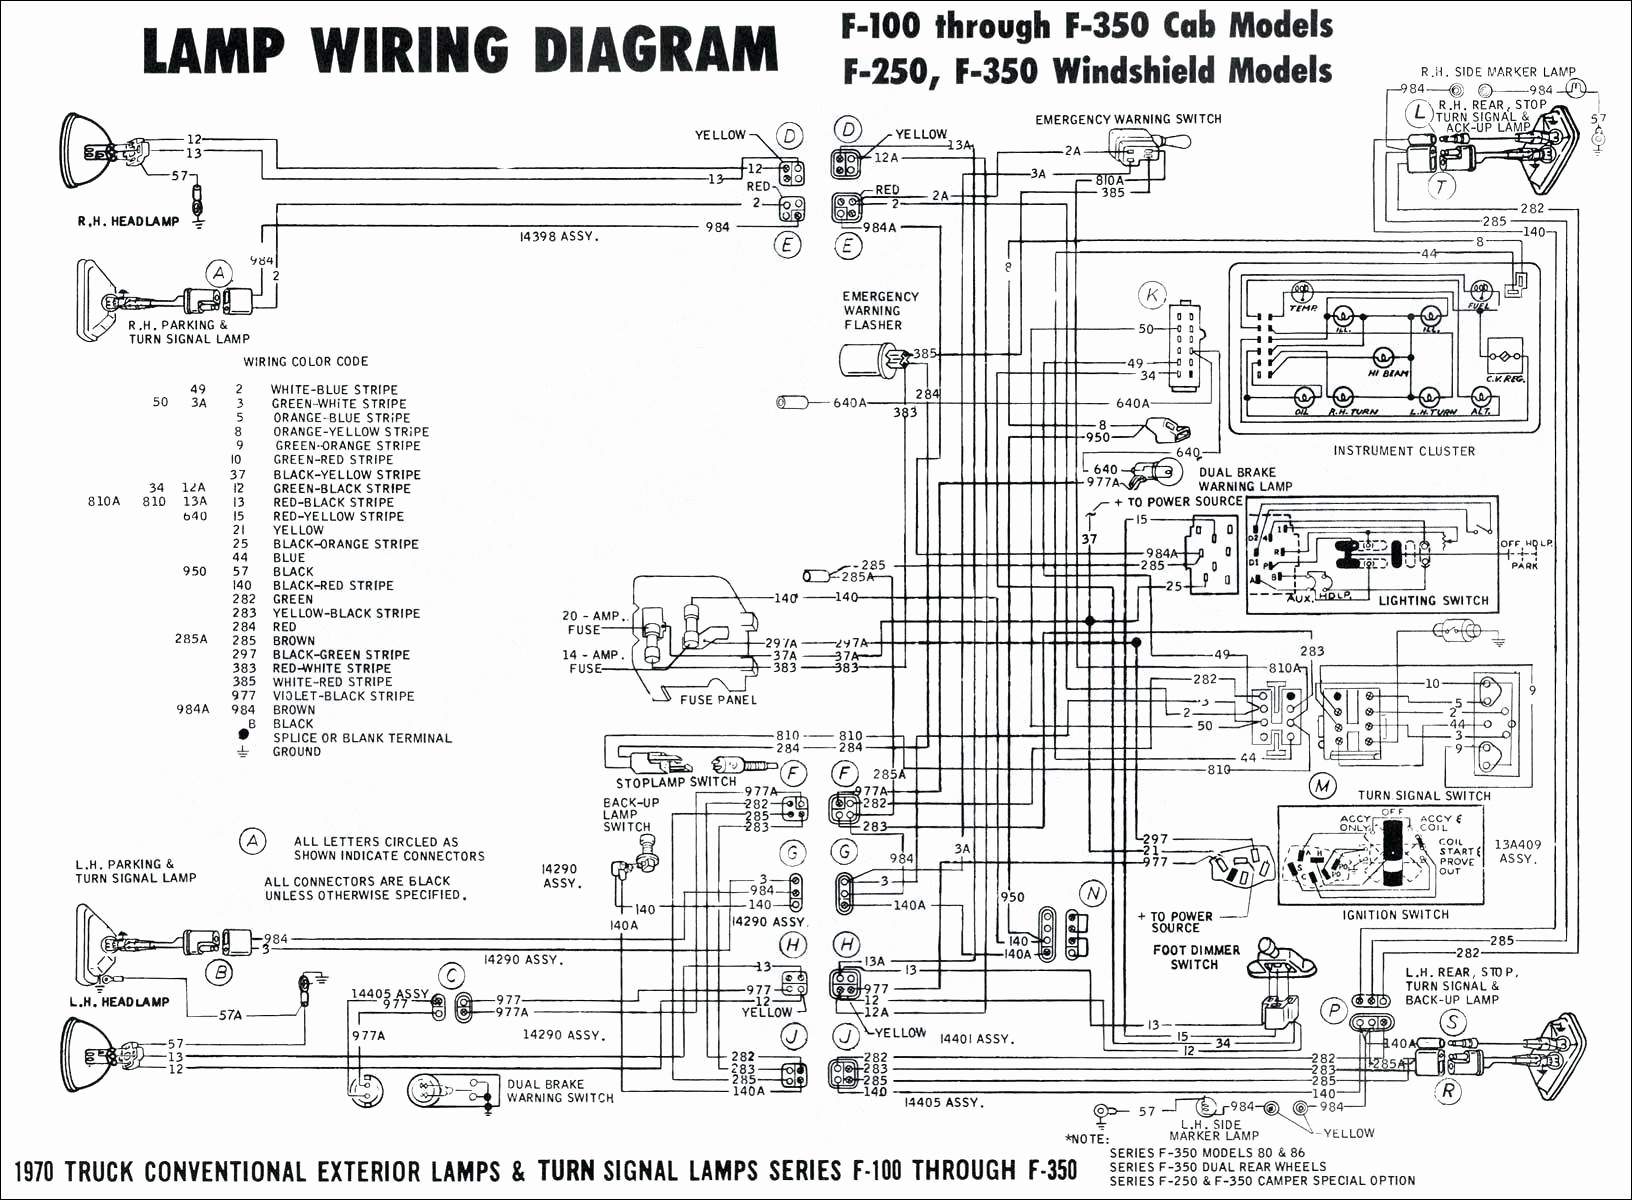 Electric Water Heater thermostat Wiring Diagram Luxury Wiring Diagram Hot Water Heater Archives Joescablecar